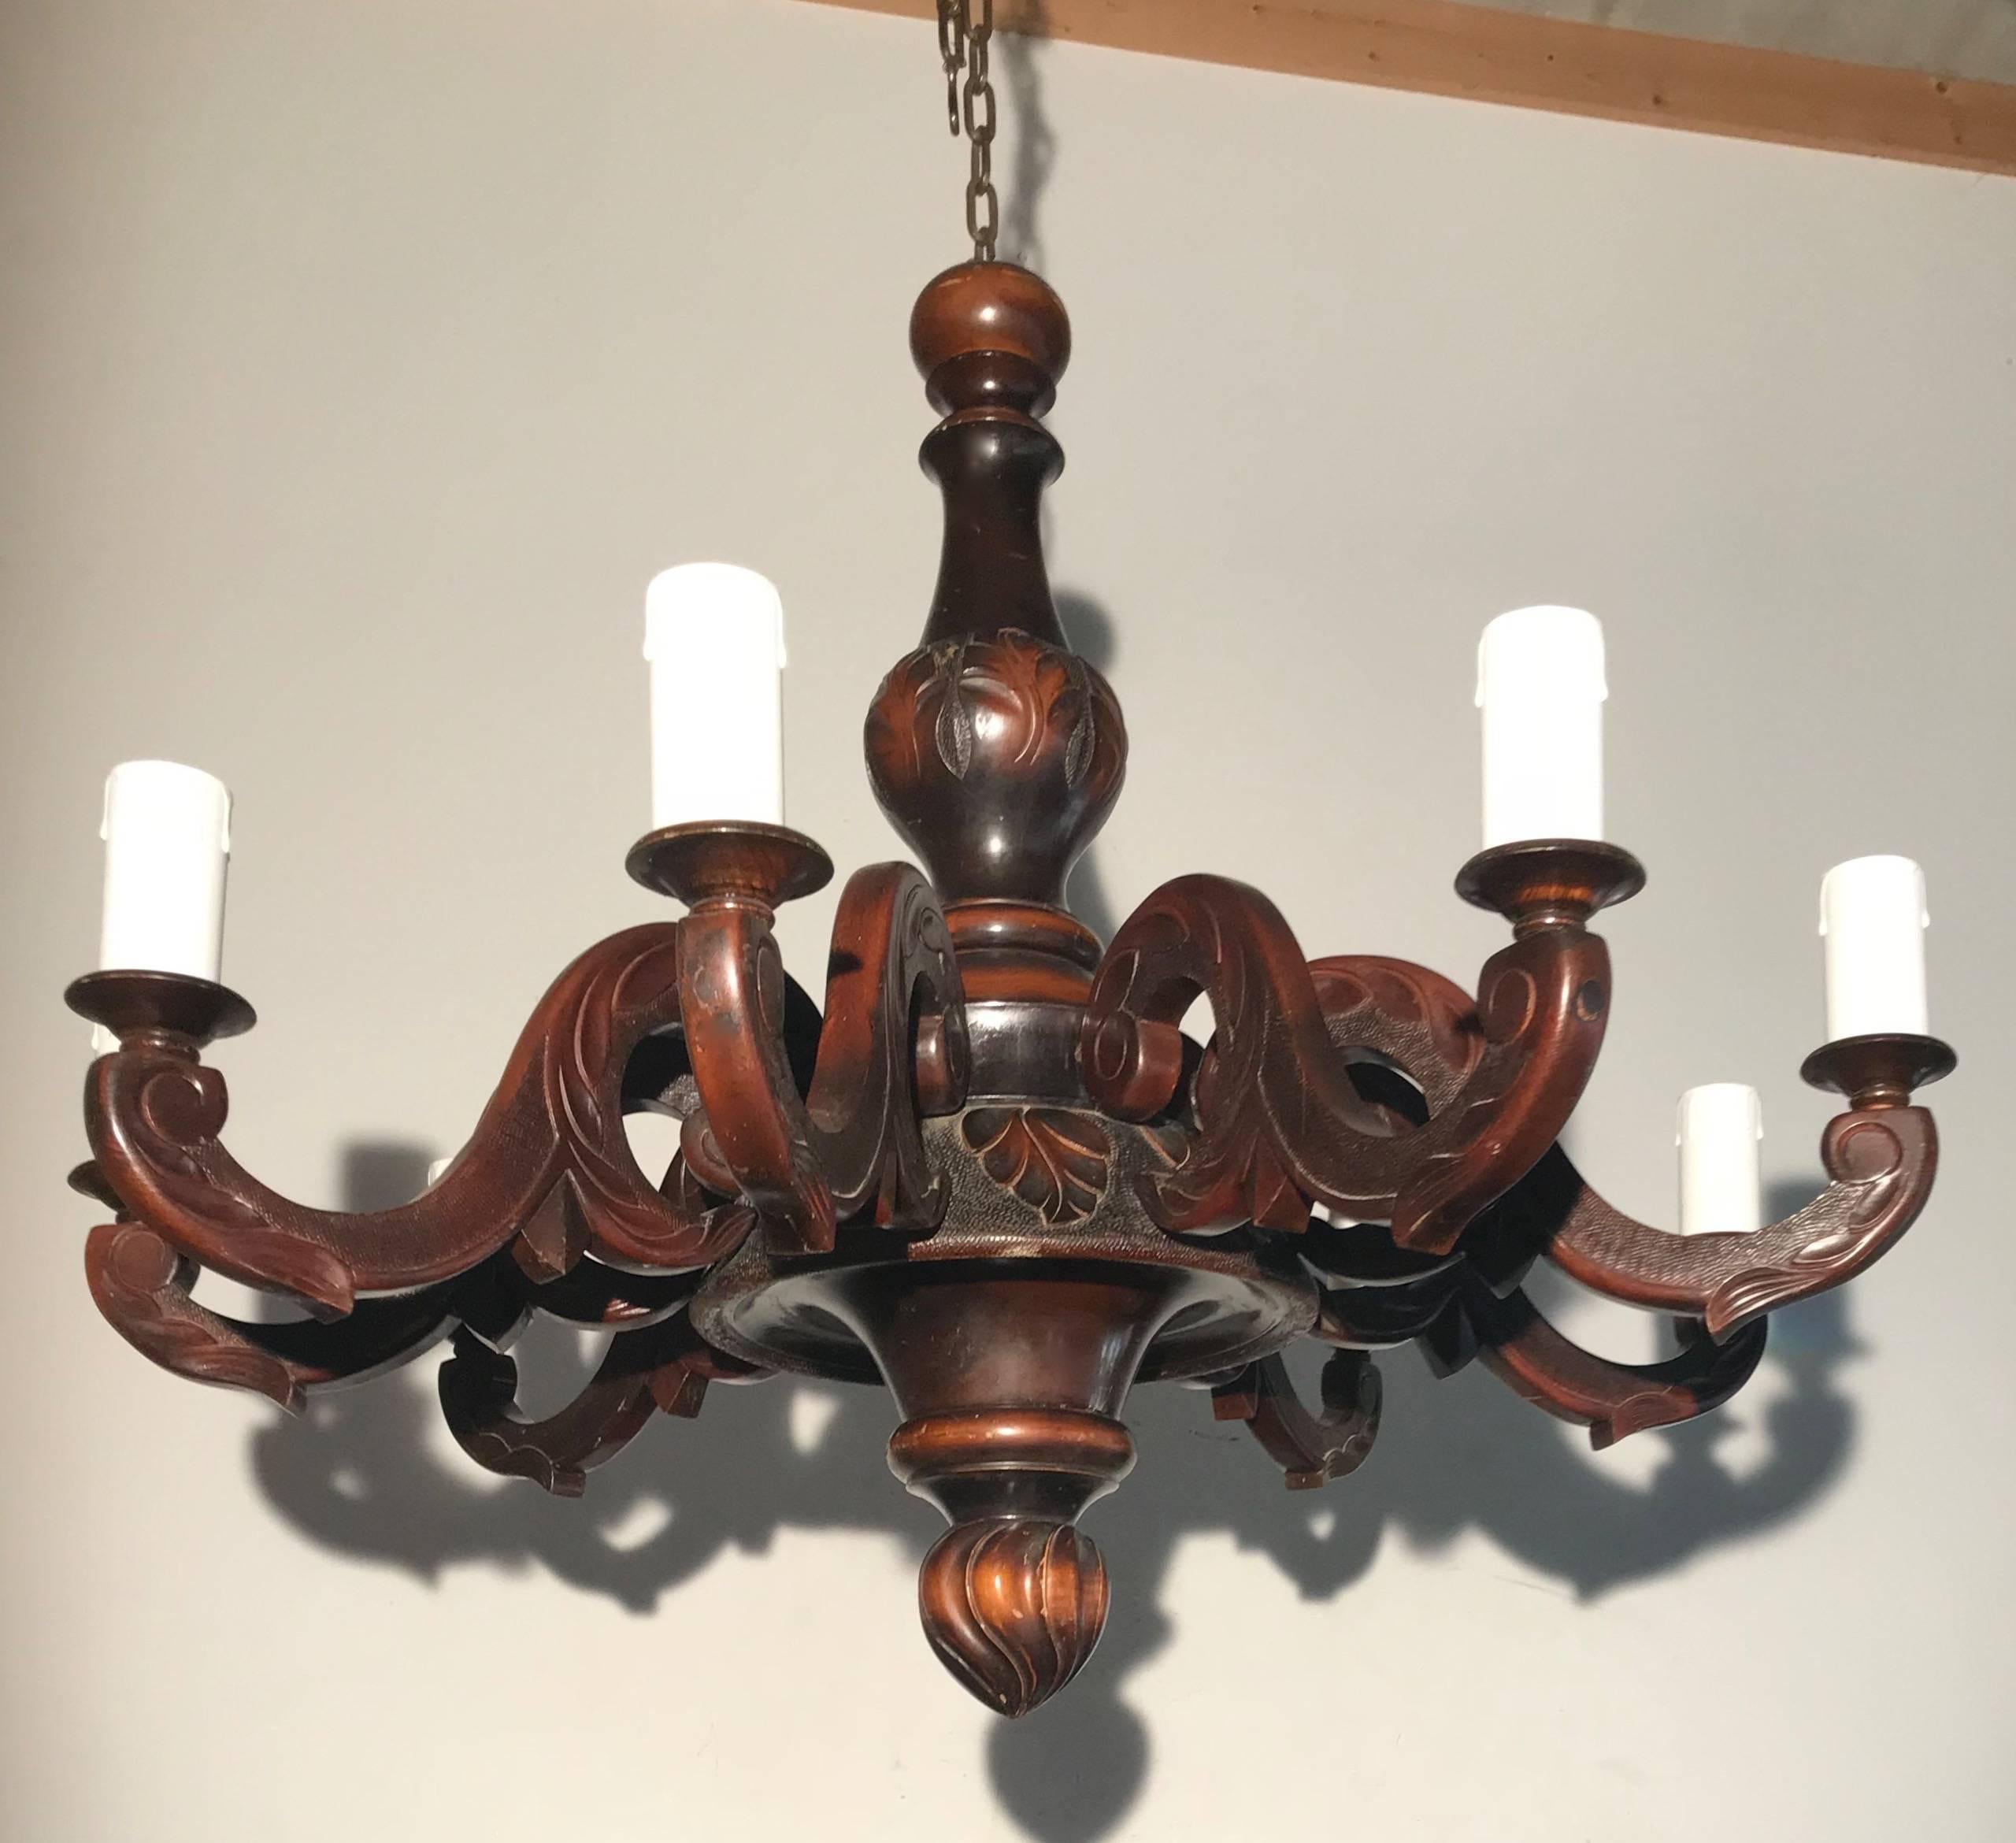 Patinated Large & Handcrafted Wooden Nine-Arm Dining Room Chandelier with a Great Patina